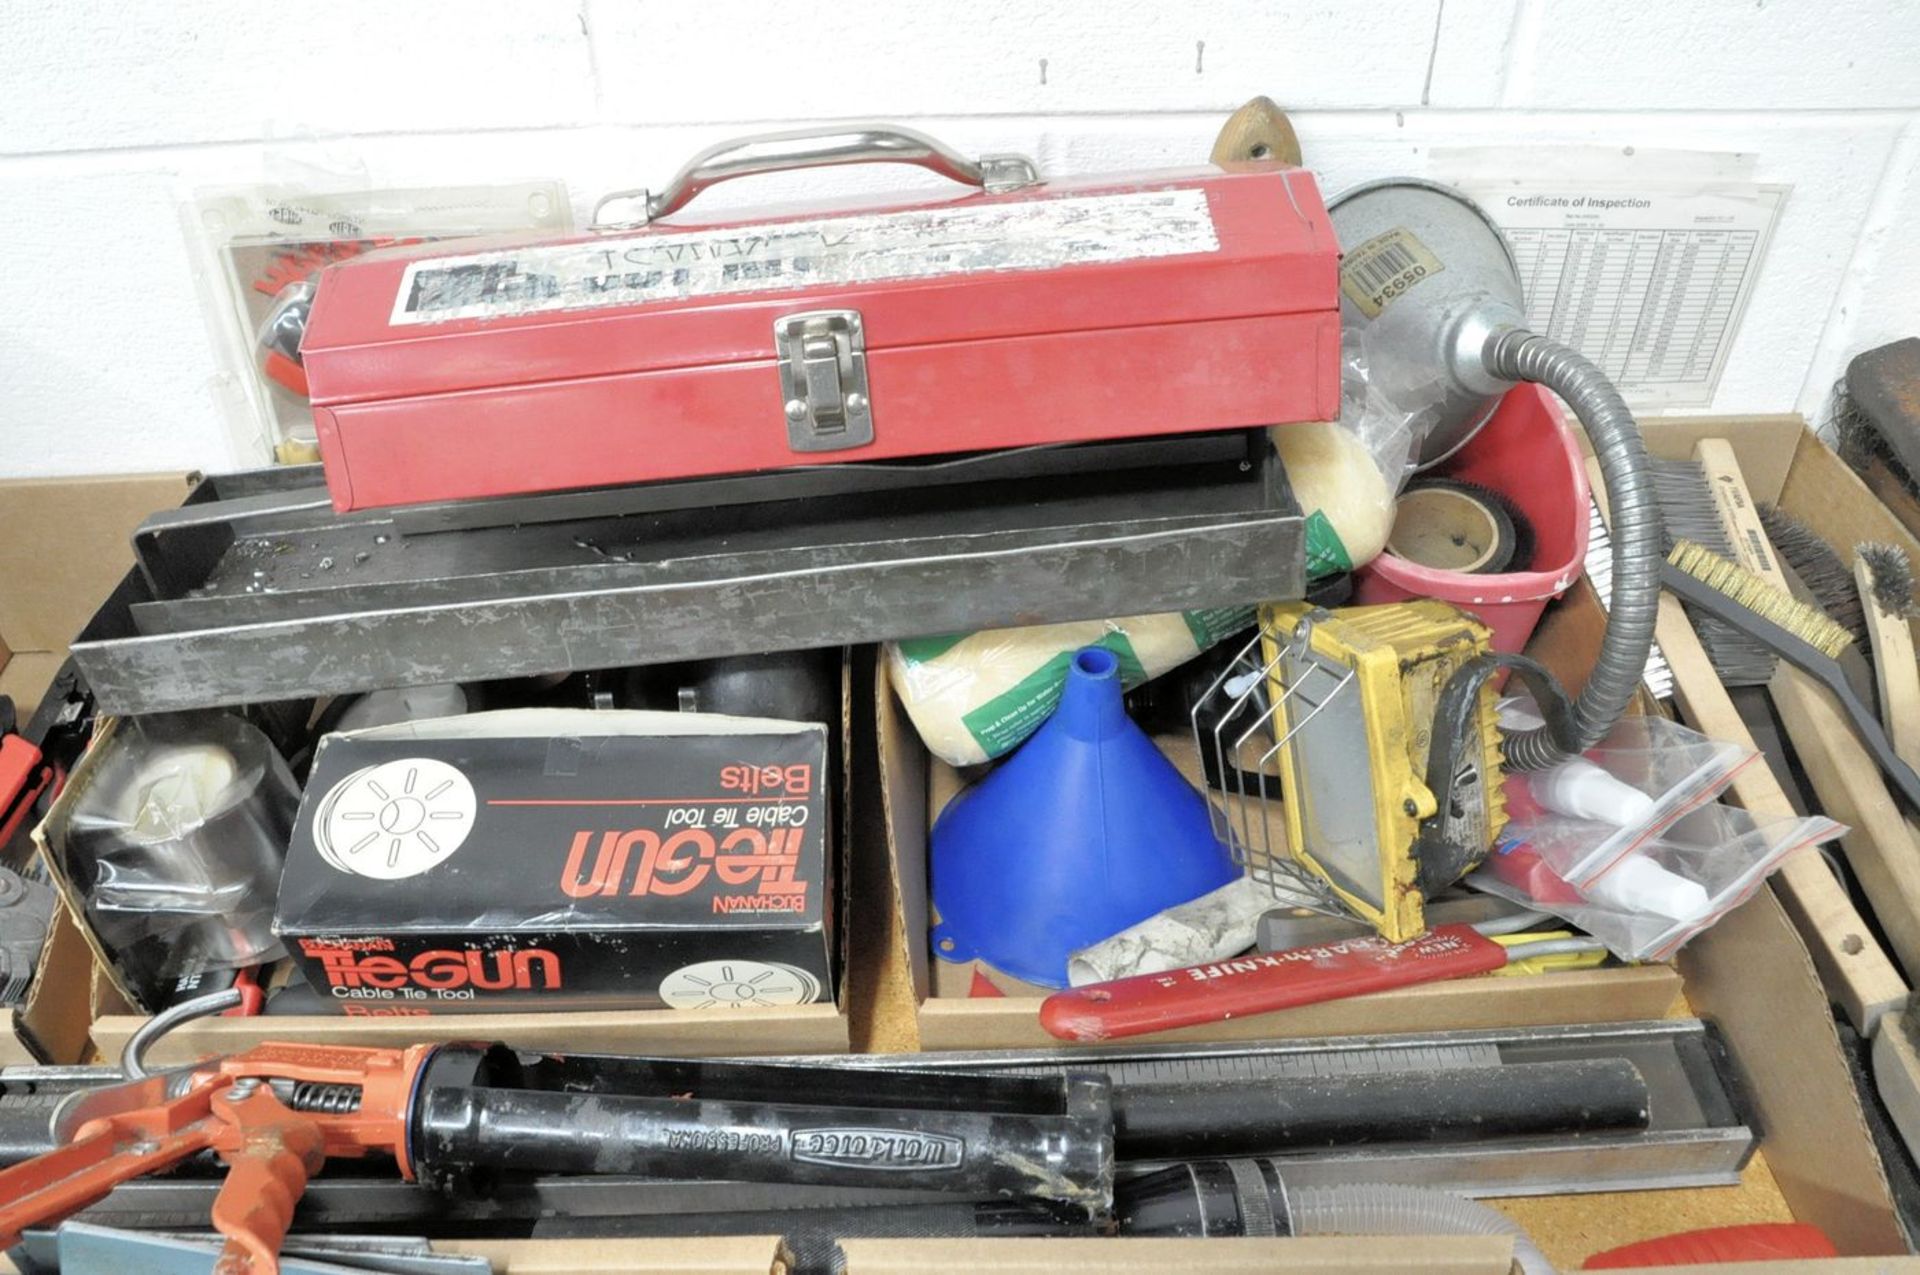 Lot - Brushes, Paint Tray, Paint Sprayer, Wire Strippers, Tape Measures, Utility Knives, - Image 5 of 10